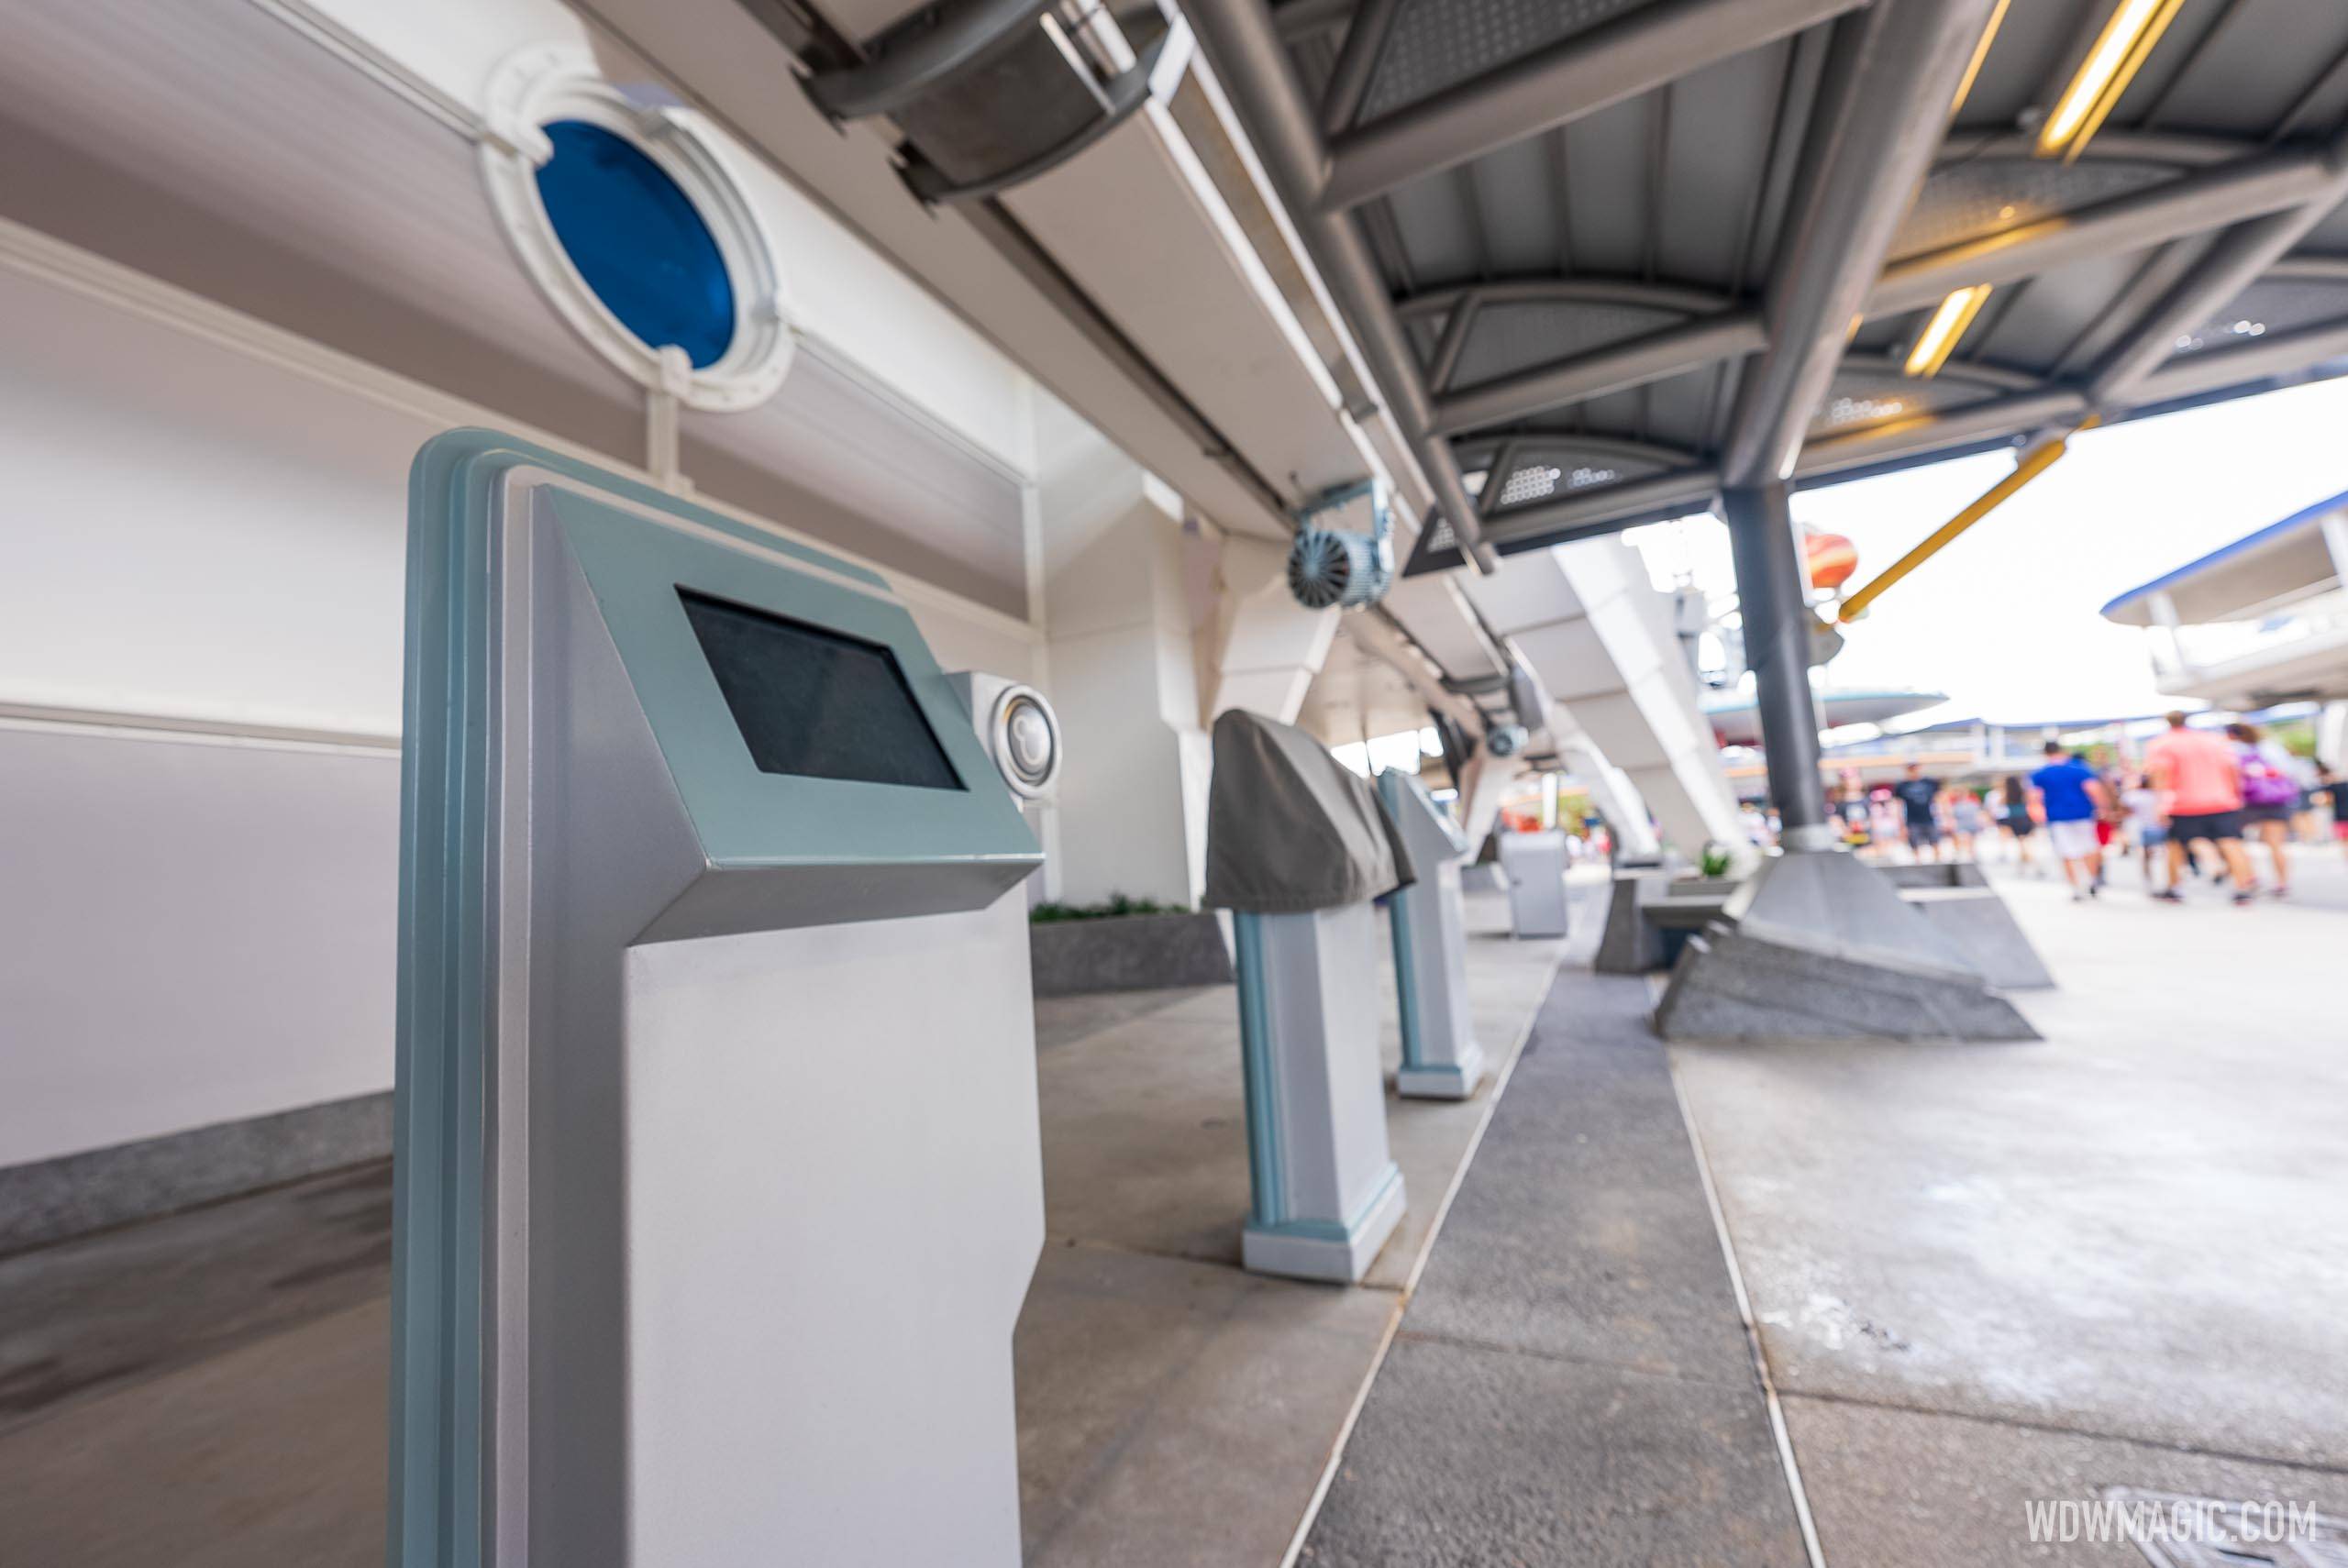 Kiosks near the former Stitch attraction